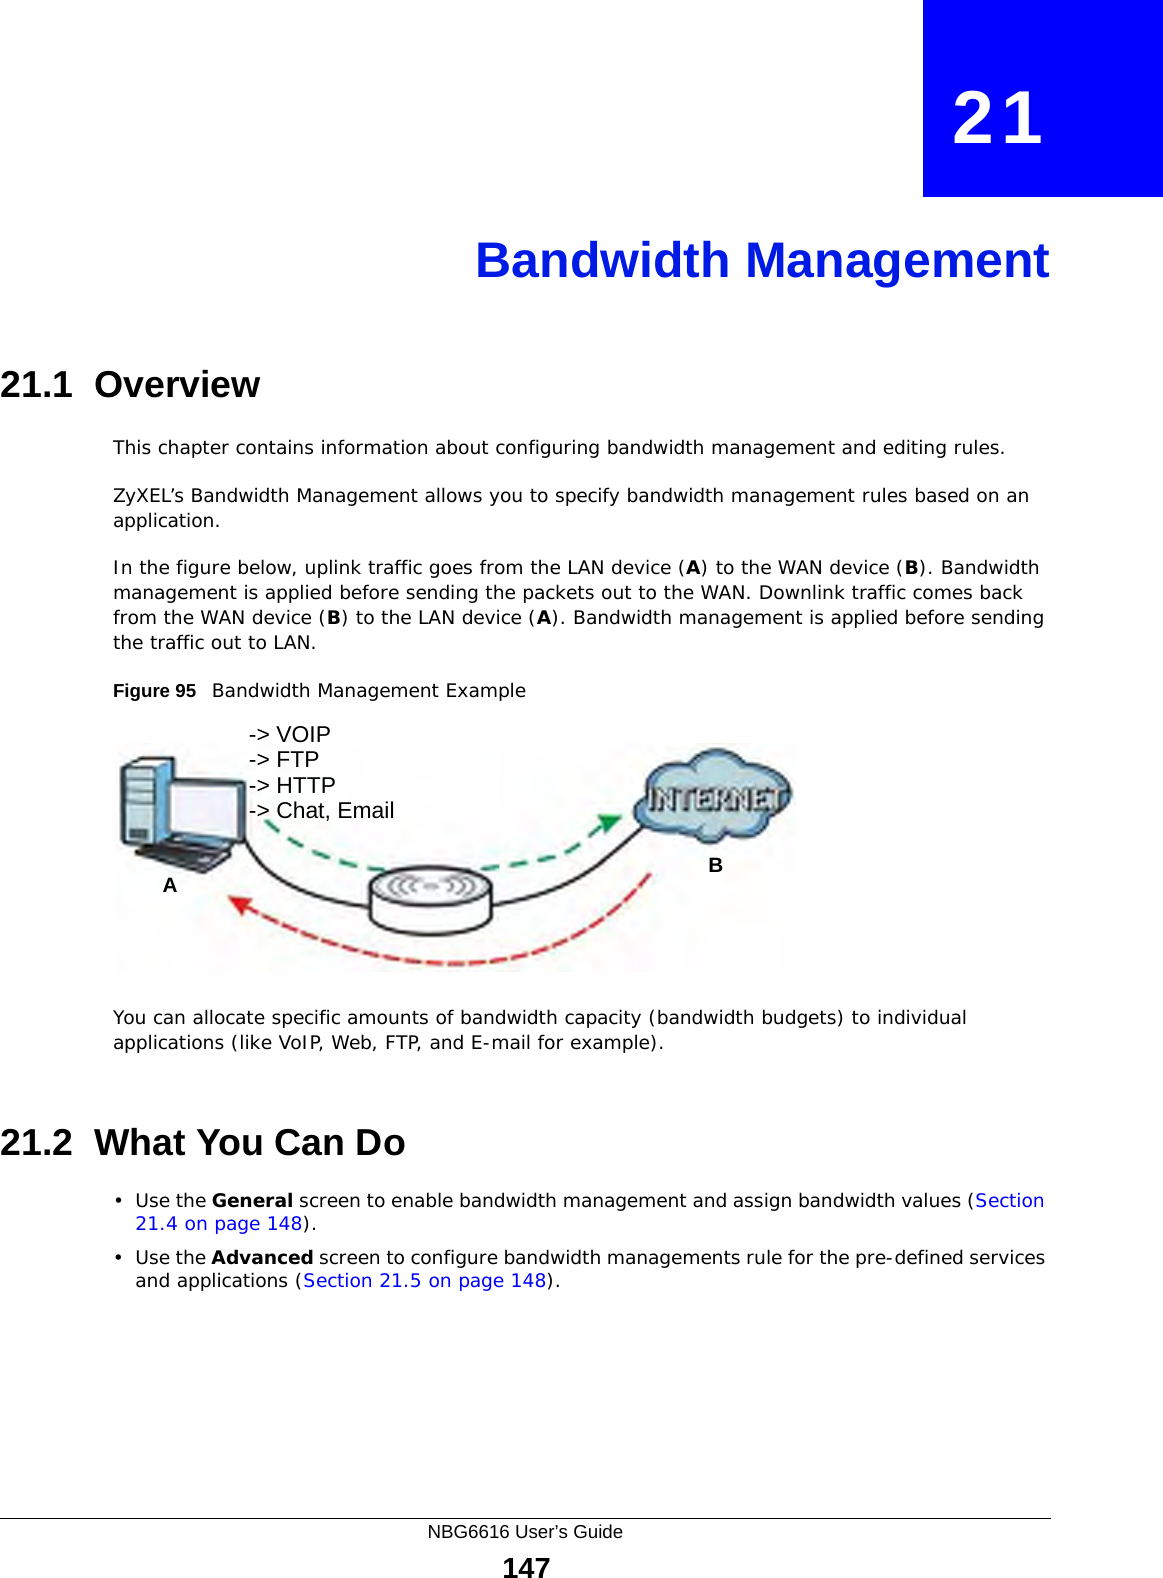 NBG6616 User’s Guide147CHAPTER   21Bandwidth Management21.1  Overview This chapter contains information about configuring bandwidth management and editing rules.ZyXEL’s Bandwidth Management allows you to specify bandwidth management rules based on an application. In the figure below, uplink traffic goes from the LAN device (A) to the WAN device (B). Bandwidth management is applied before sending the packets out to the WAN. Downlink traffic comes back from the WAN device (B) to the LAN device (A). Bandwidth management is applied before sending the traffic out to LAN.Figure 95   Bandwidth Management ExampleYou can allocate specific amounts of bandwidth capacity (bandwidth budgets) to individual applications (like VoIP, Web, FTP, and E-mail for example).21.2  What You Can Do•Use the General screen to enable bandwidth management and assign bandwidth values (Section 21.4 on page 148).•Use the Advanced screen to configure bandwidth managements rule for the pre-defined services and applications (Section 21.5 on page 148).AB-&gt; VOIP-&gt; FTP-&gt; HTTP-&gt; Chat, Email